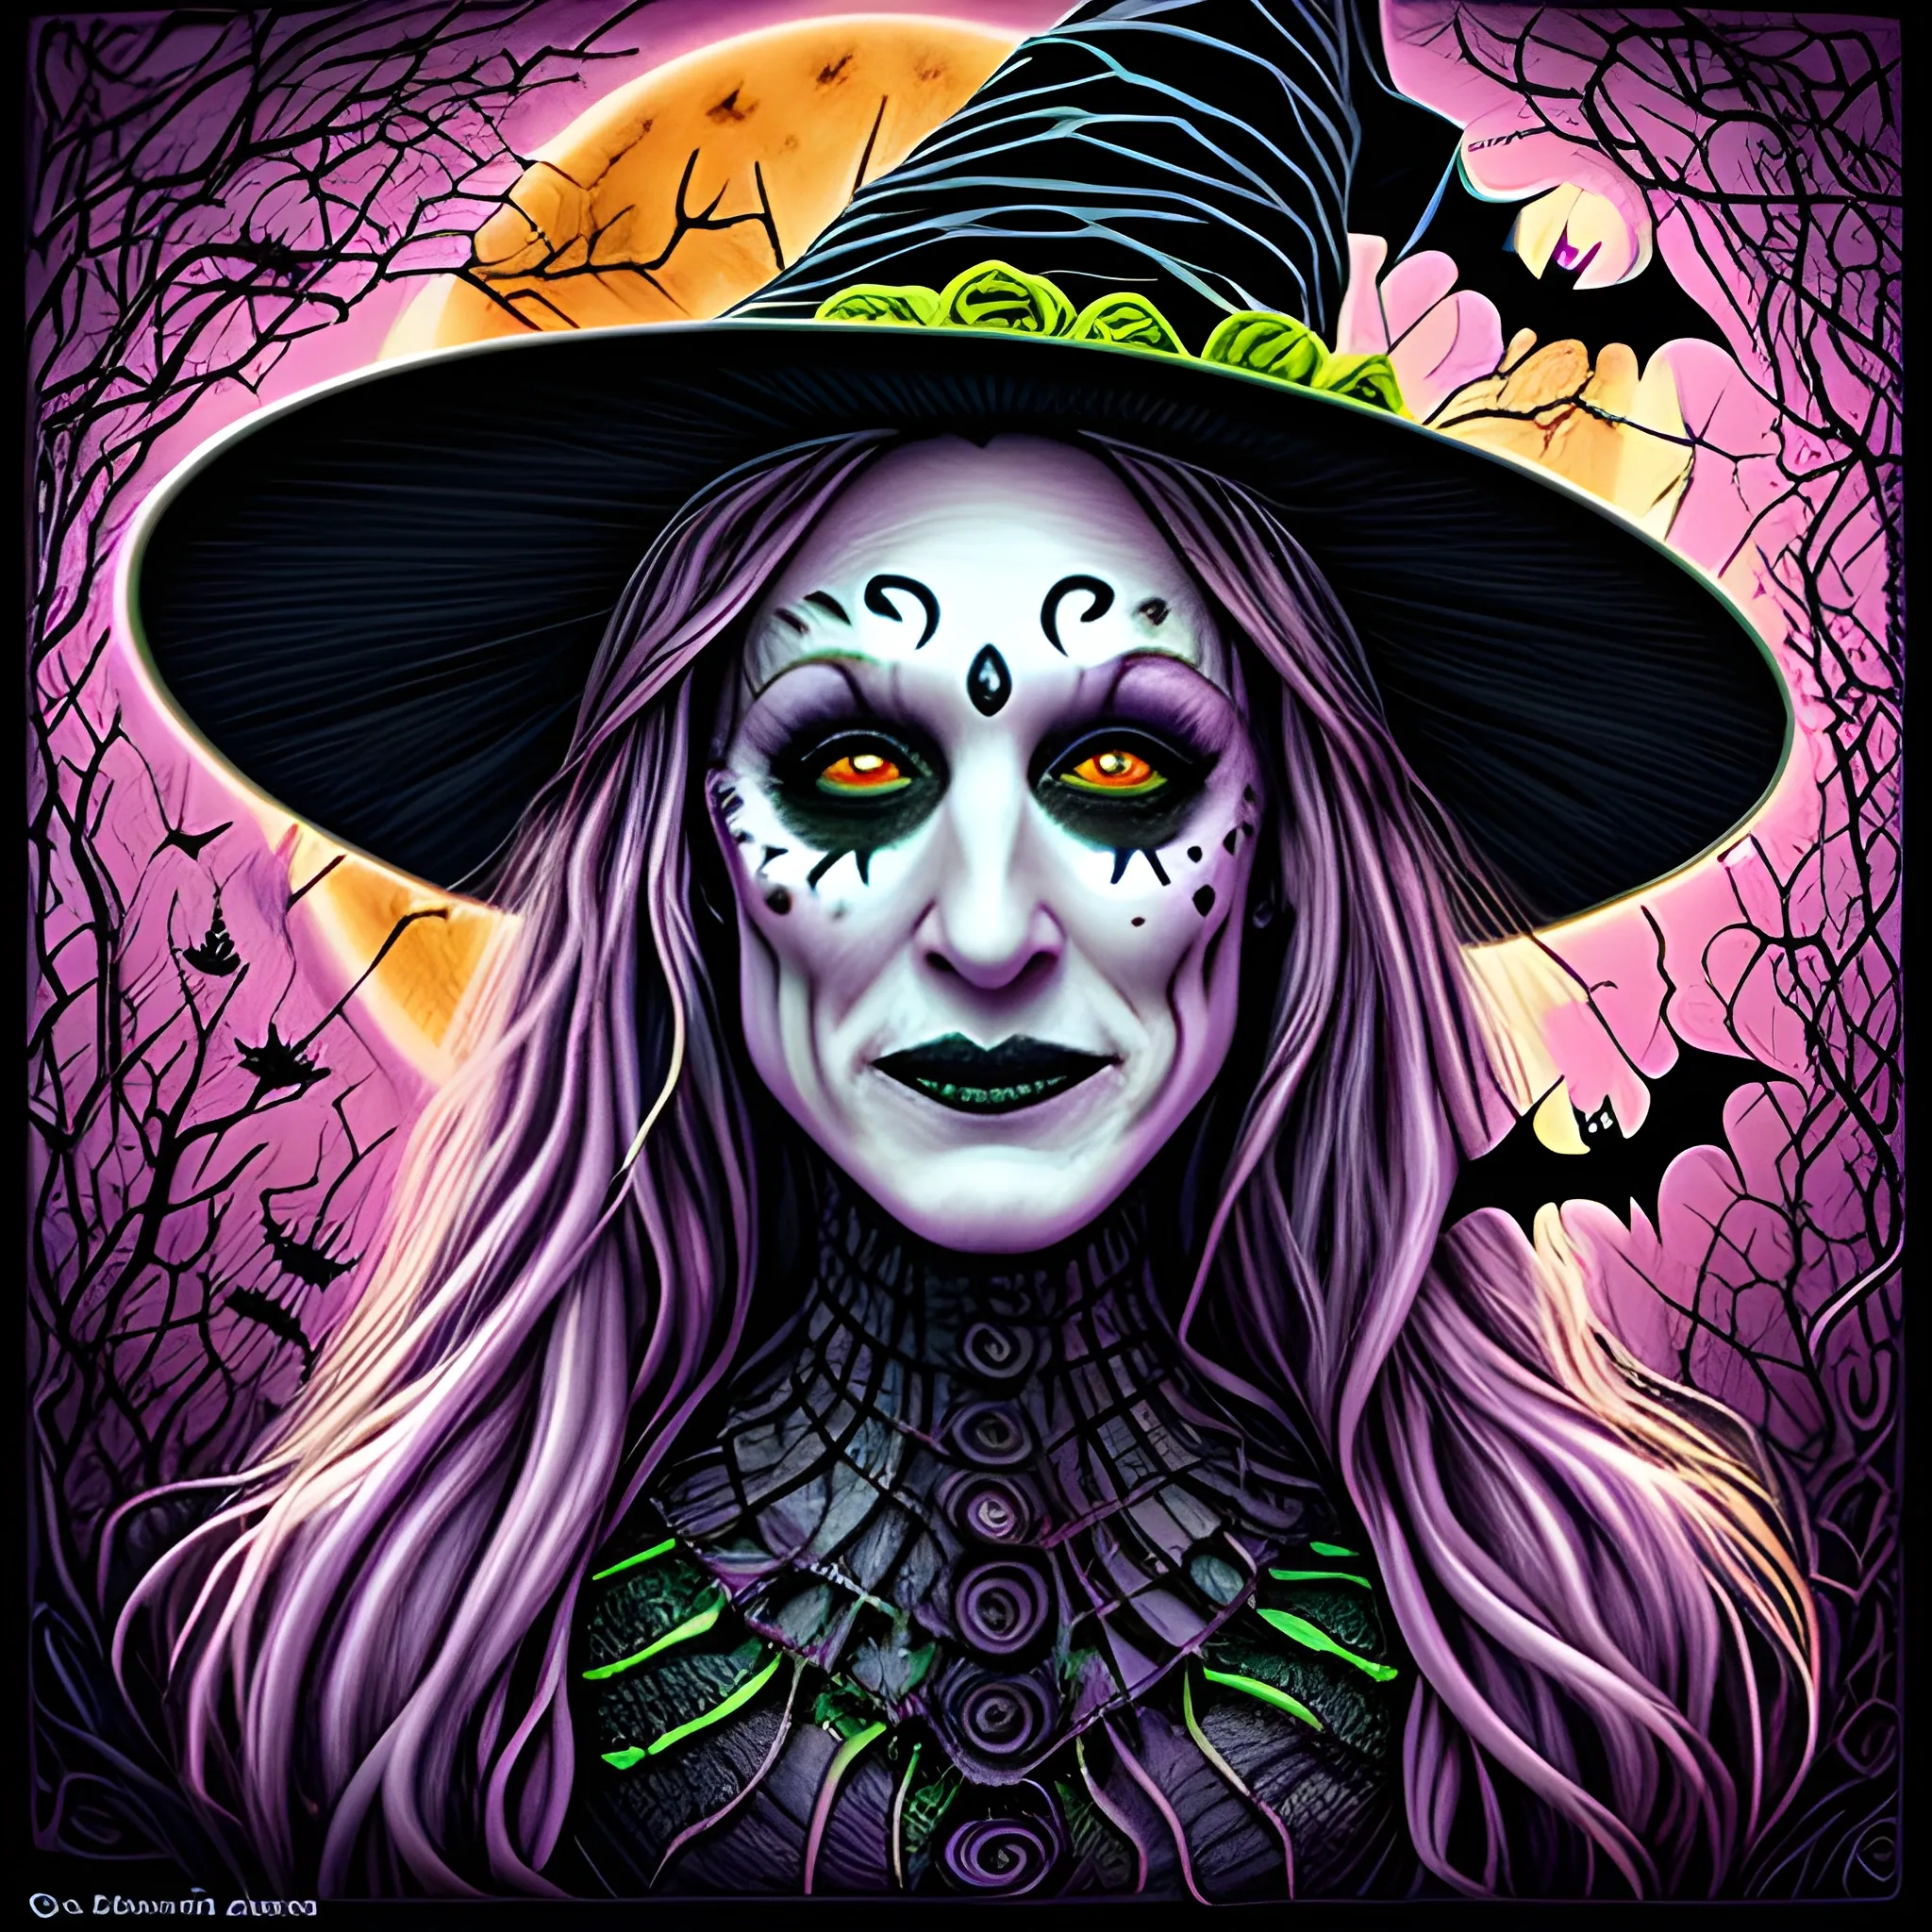 Sarah Jessica Parker as a Halloween Witch, wearing a thorny witch hat adorned with thorns and black roses; Halloween, bats, full moon in a nebula sky, neon spray paint, acrylic paint, fantastical surrealist world, in the style of Stephen Gammell, extremely detailed Zentangle style, sick, gothic, eldritch, candles, neon grape purple, dayglo orange, chartreuse green, Halloween